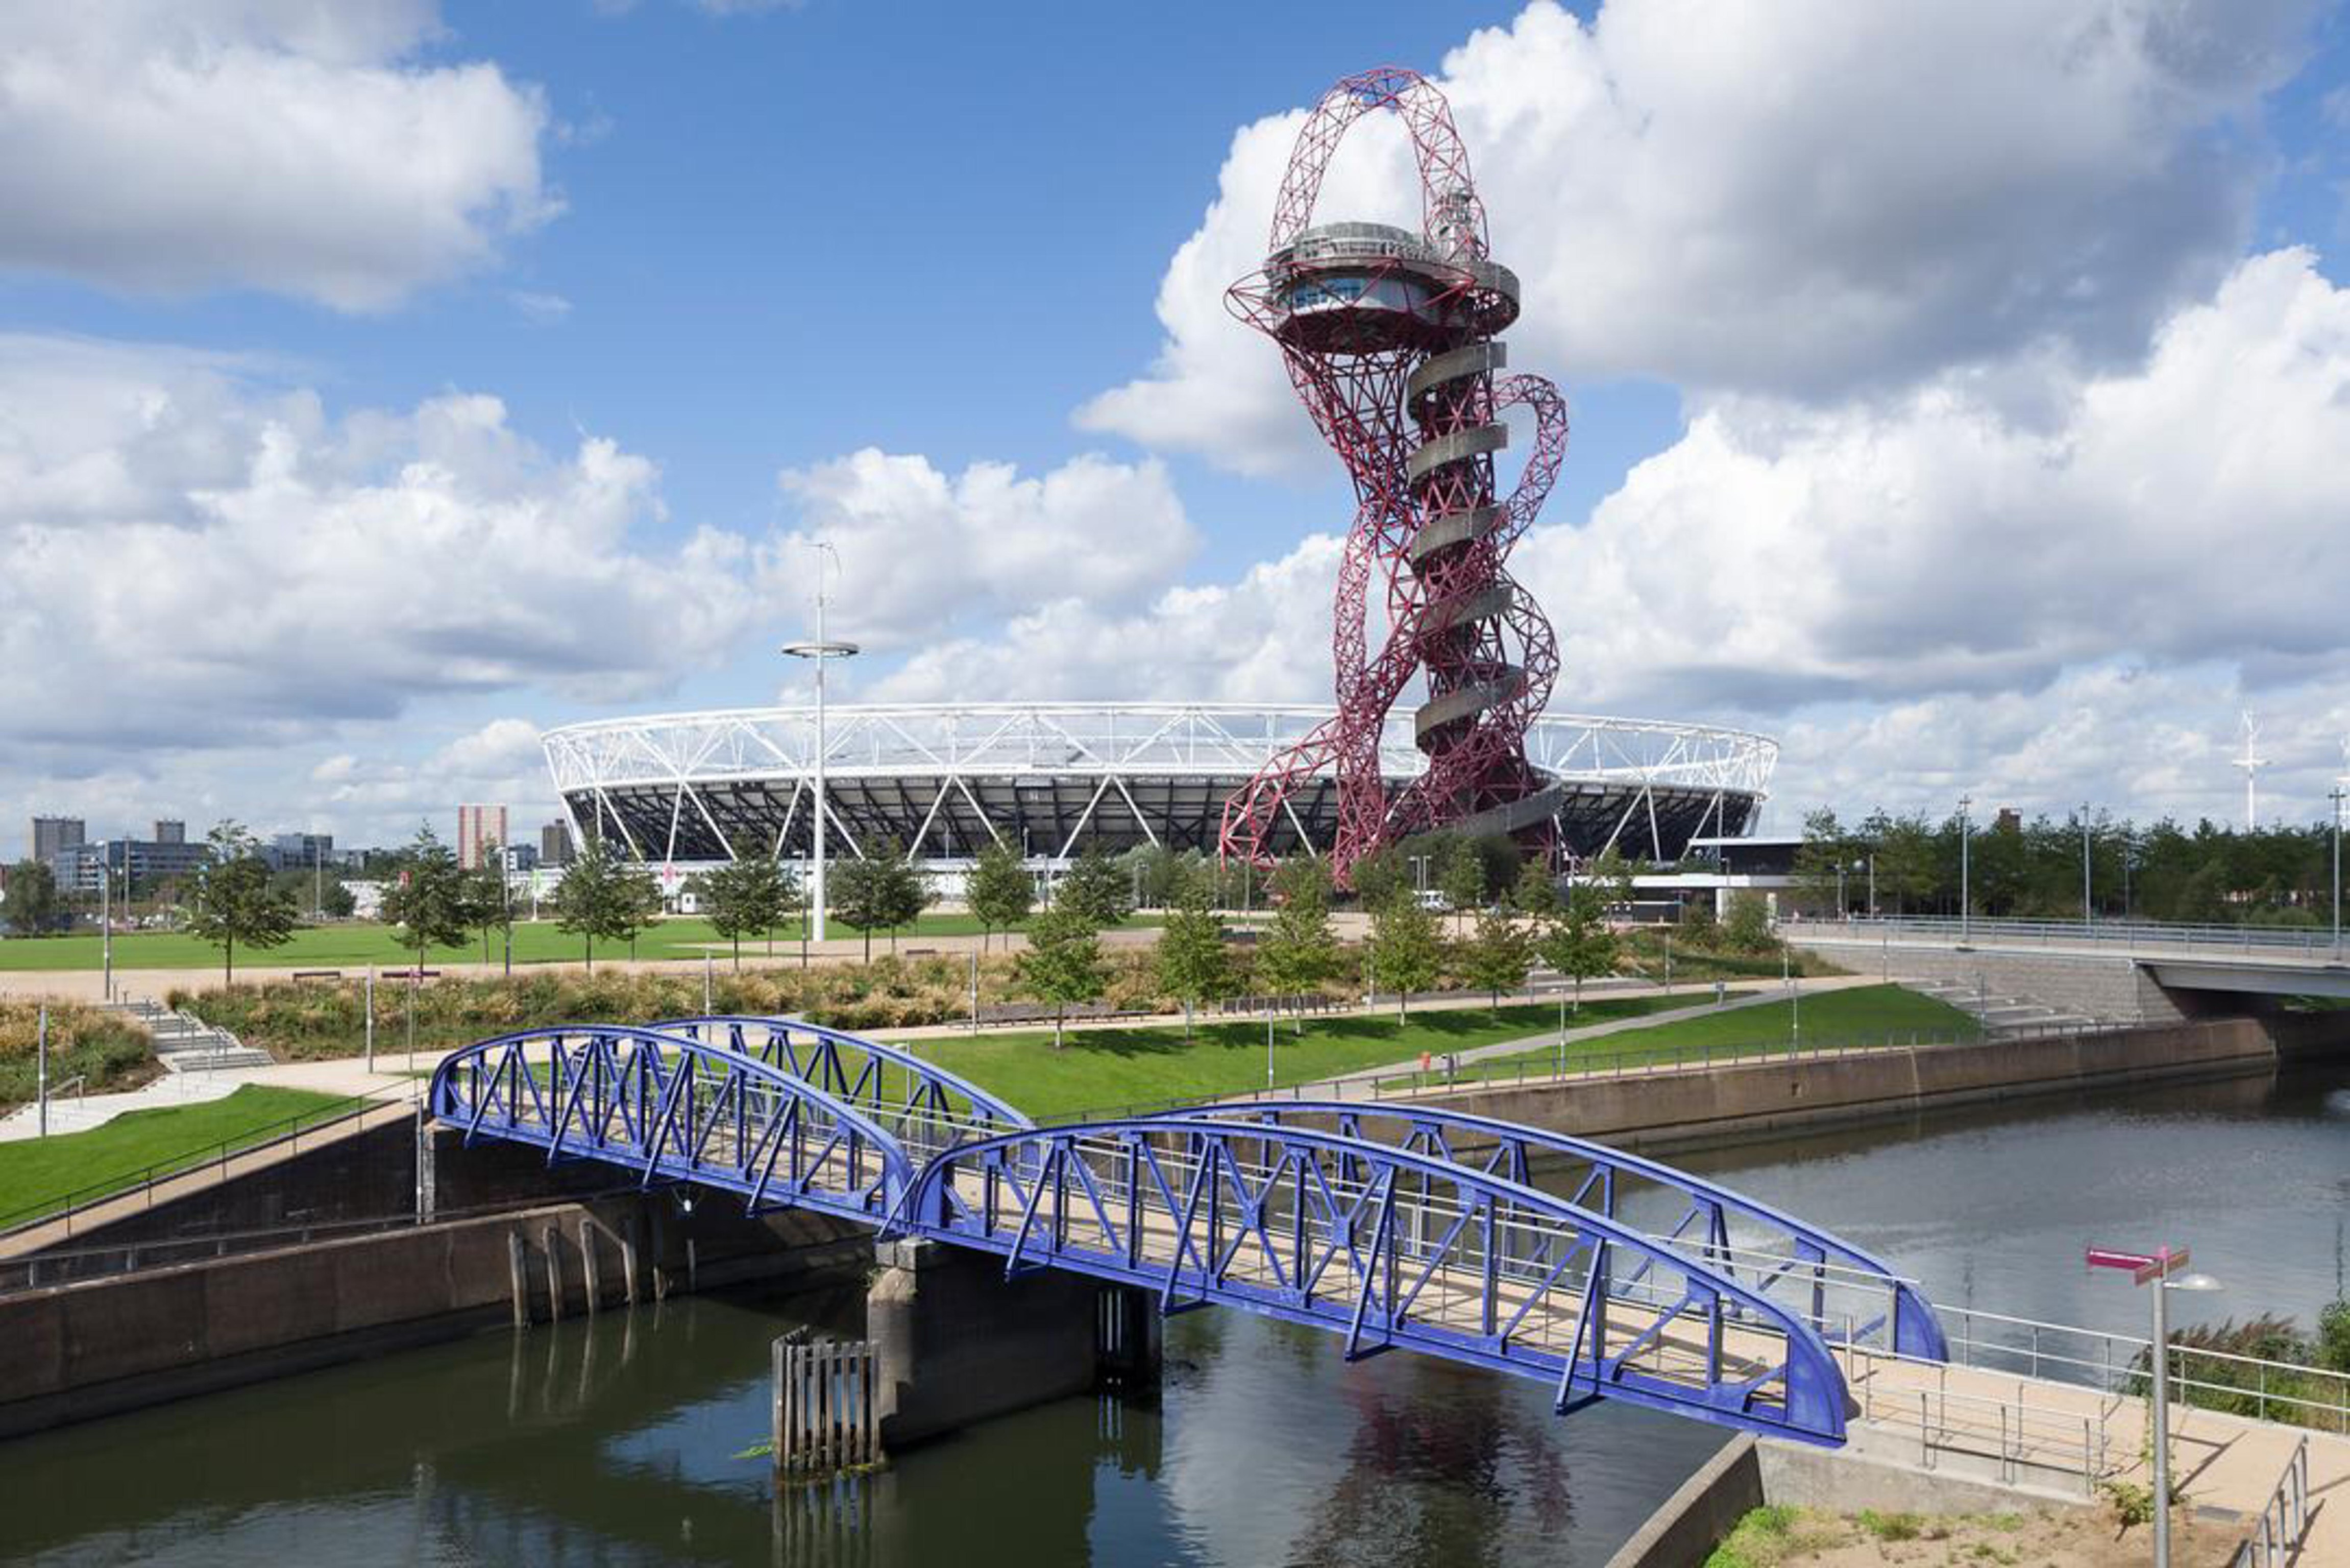 Photo of the London Olympic park, including the ArcelorMittal Orbit tower